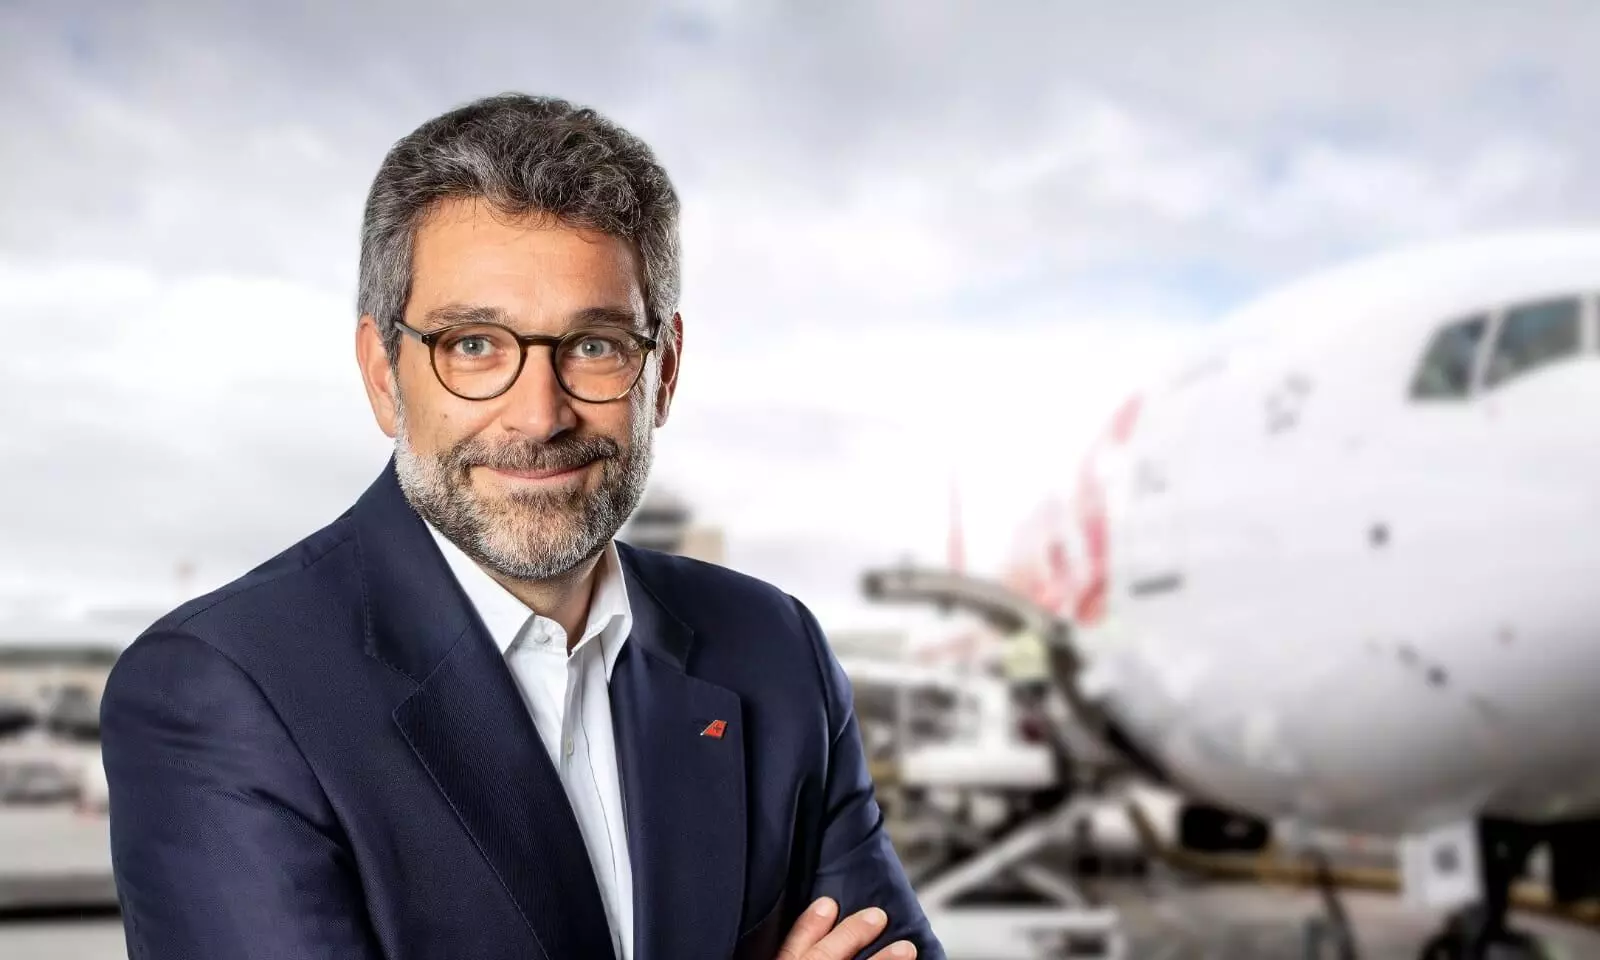 SWISS Head of Cargo Lorenzo Stoll to leave by July